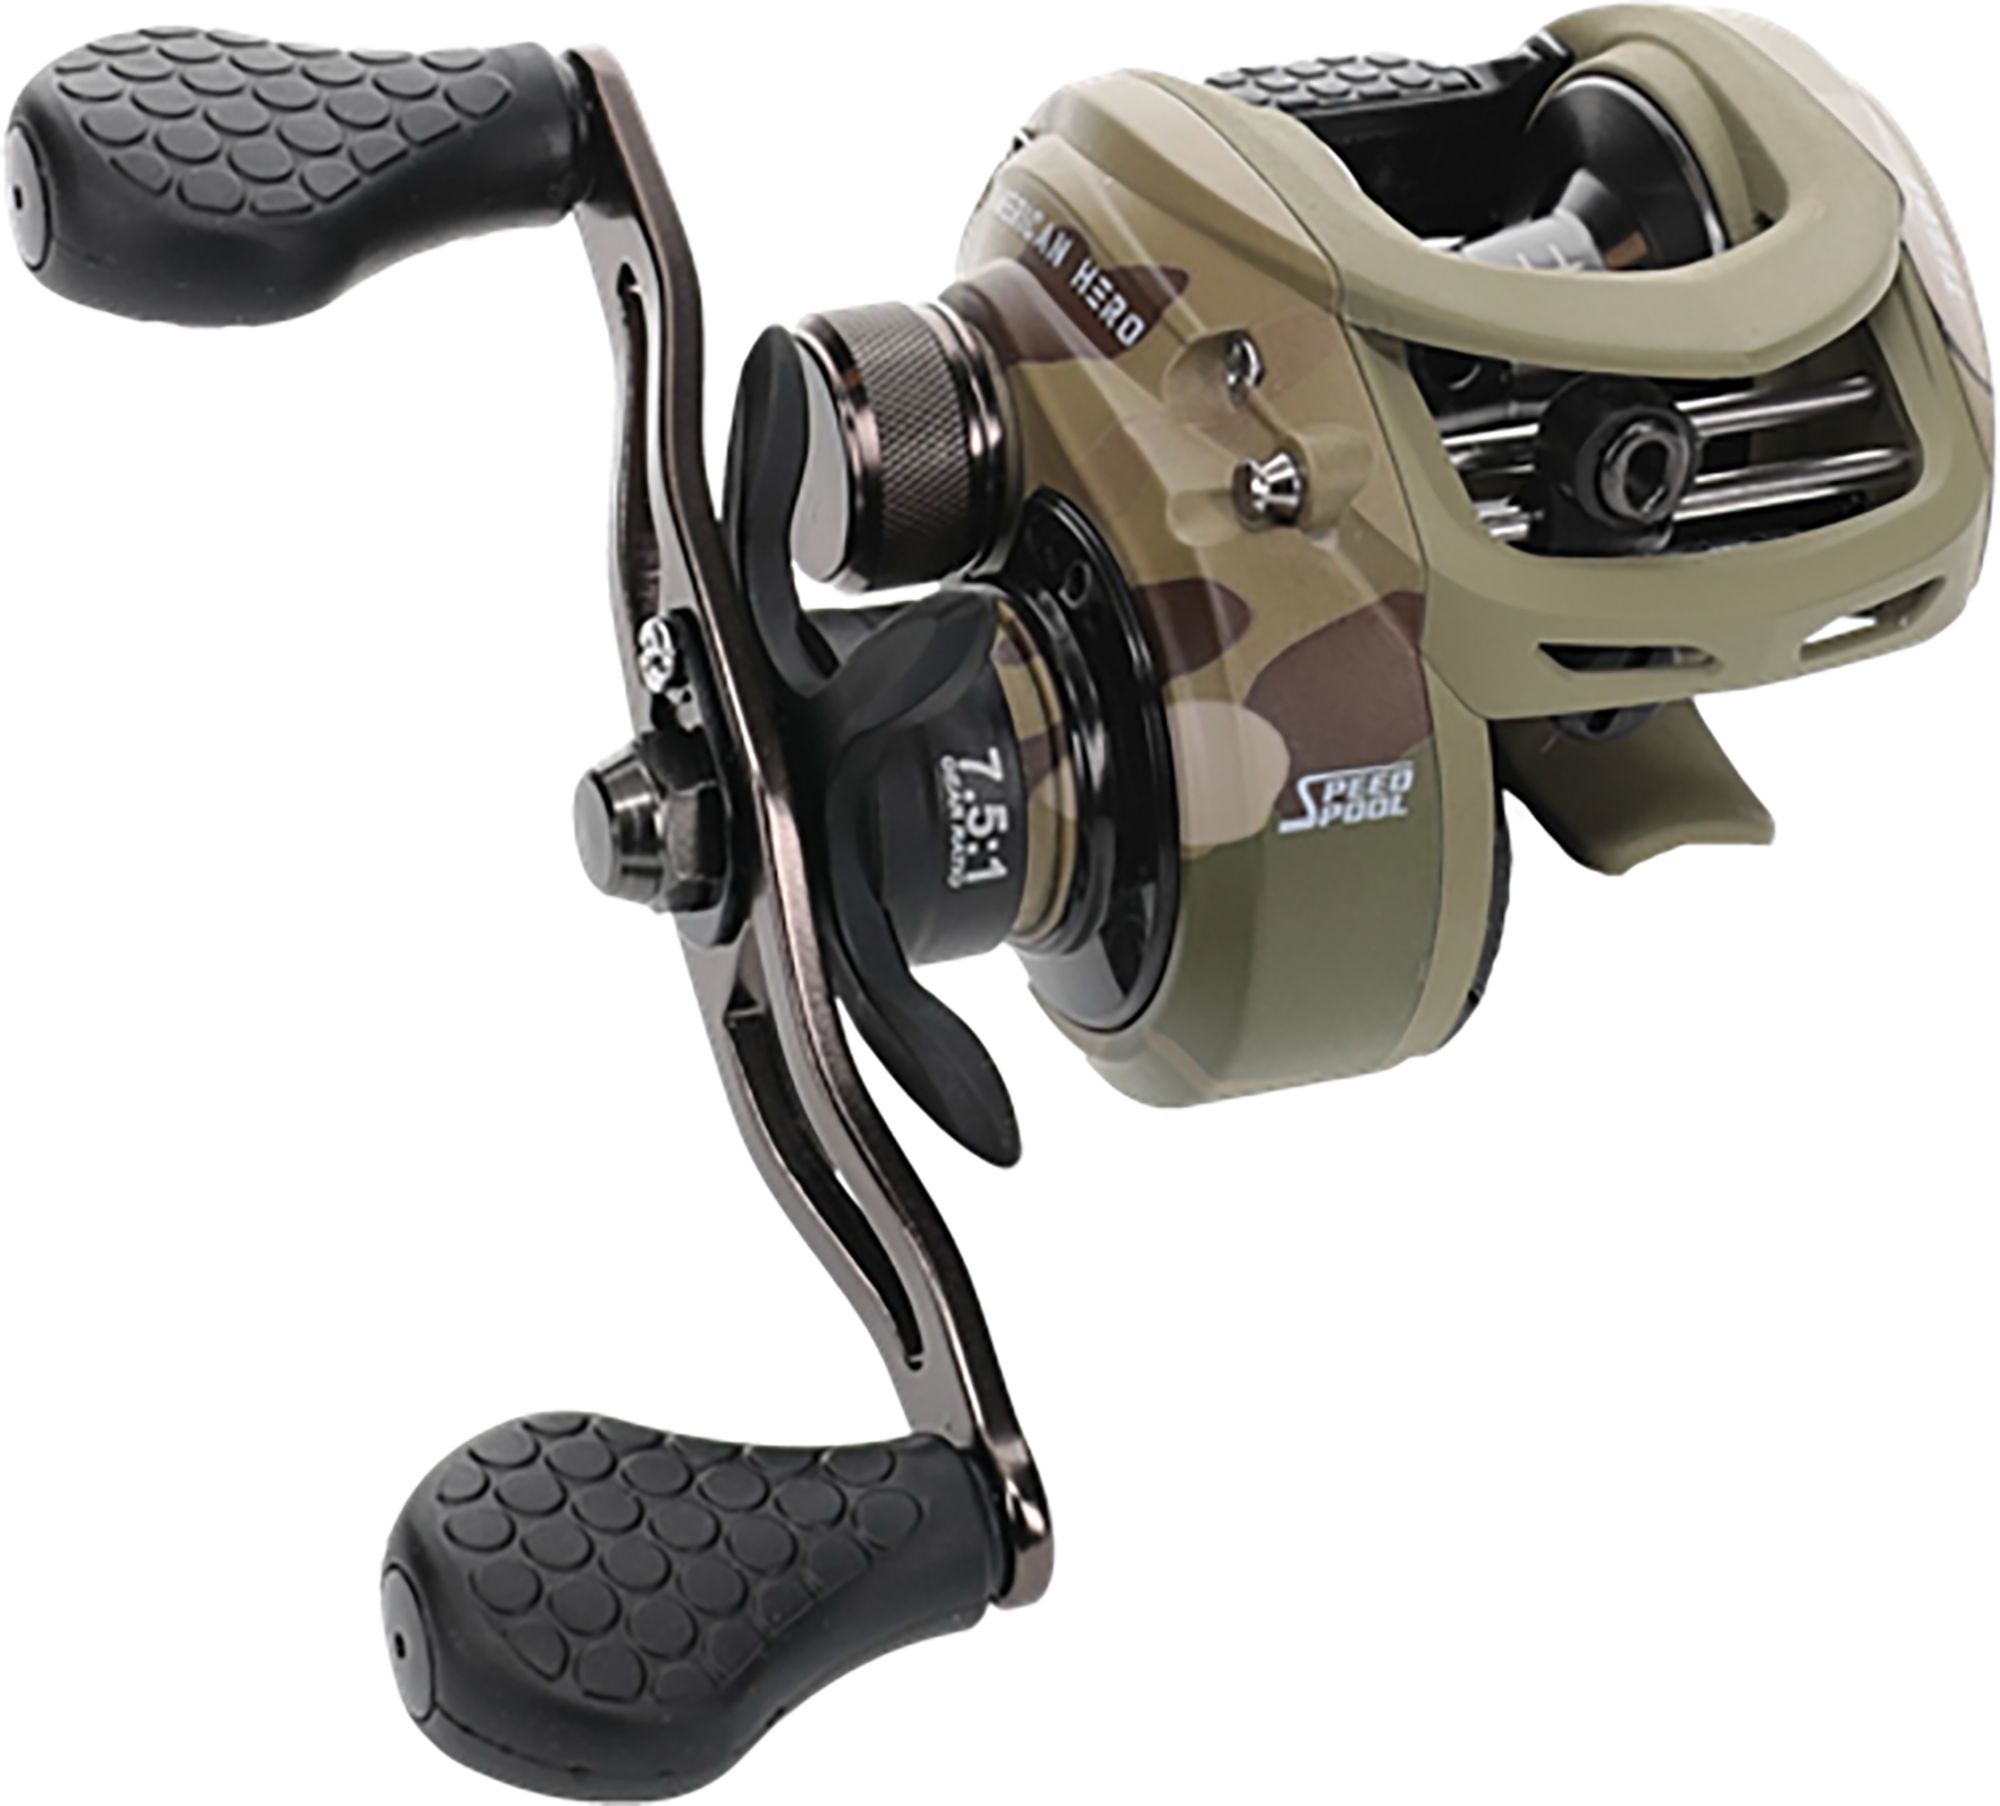 Photos - Other for Fishing Lew's American Hero Tier 1 Baitcast Reel 23LEWUMHRTR17FRHBREE